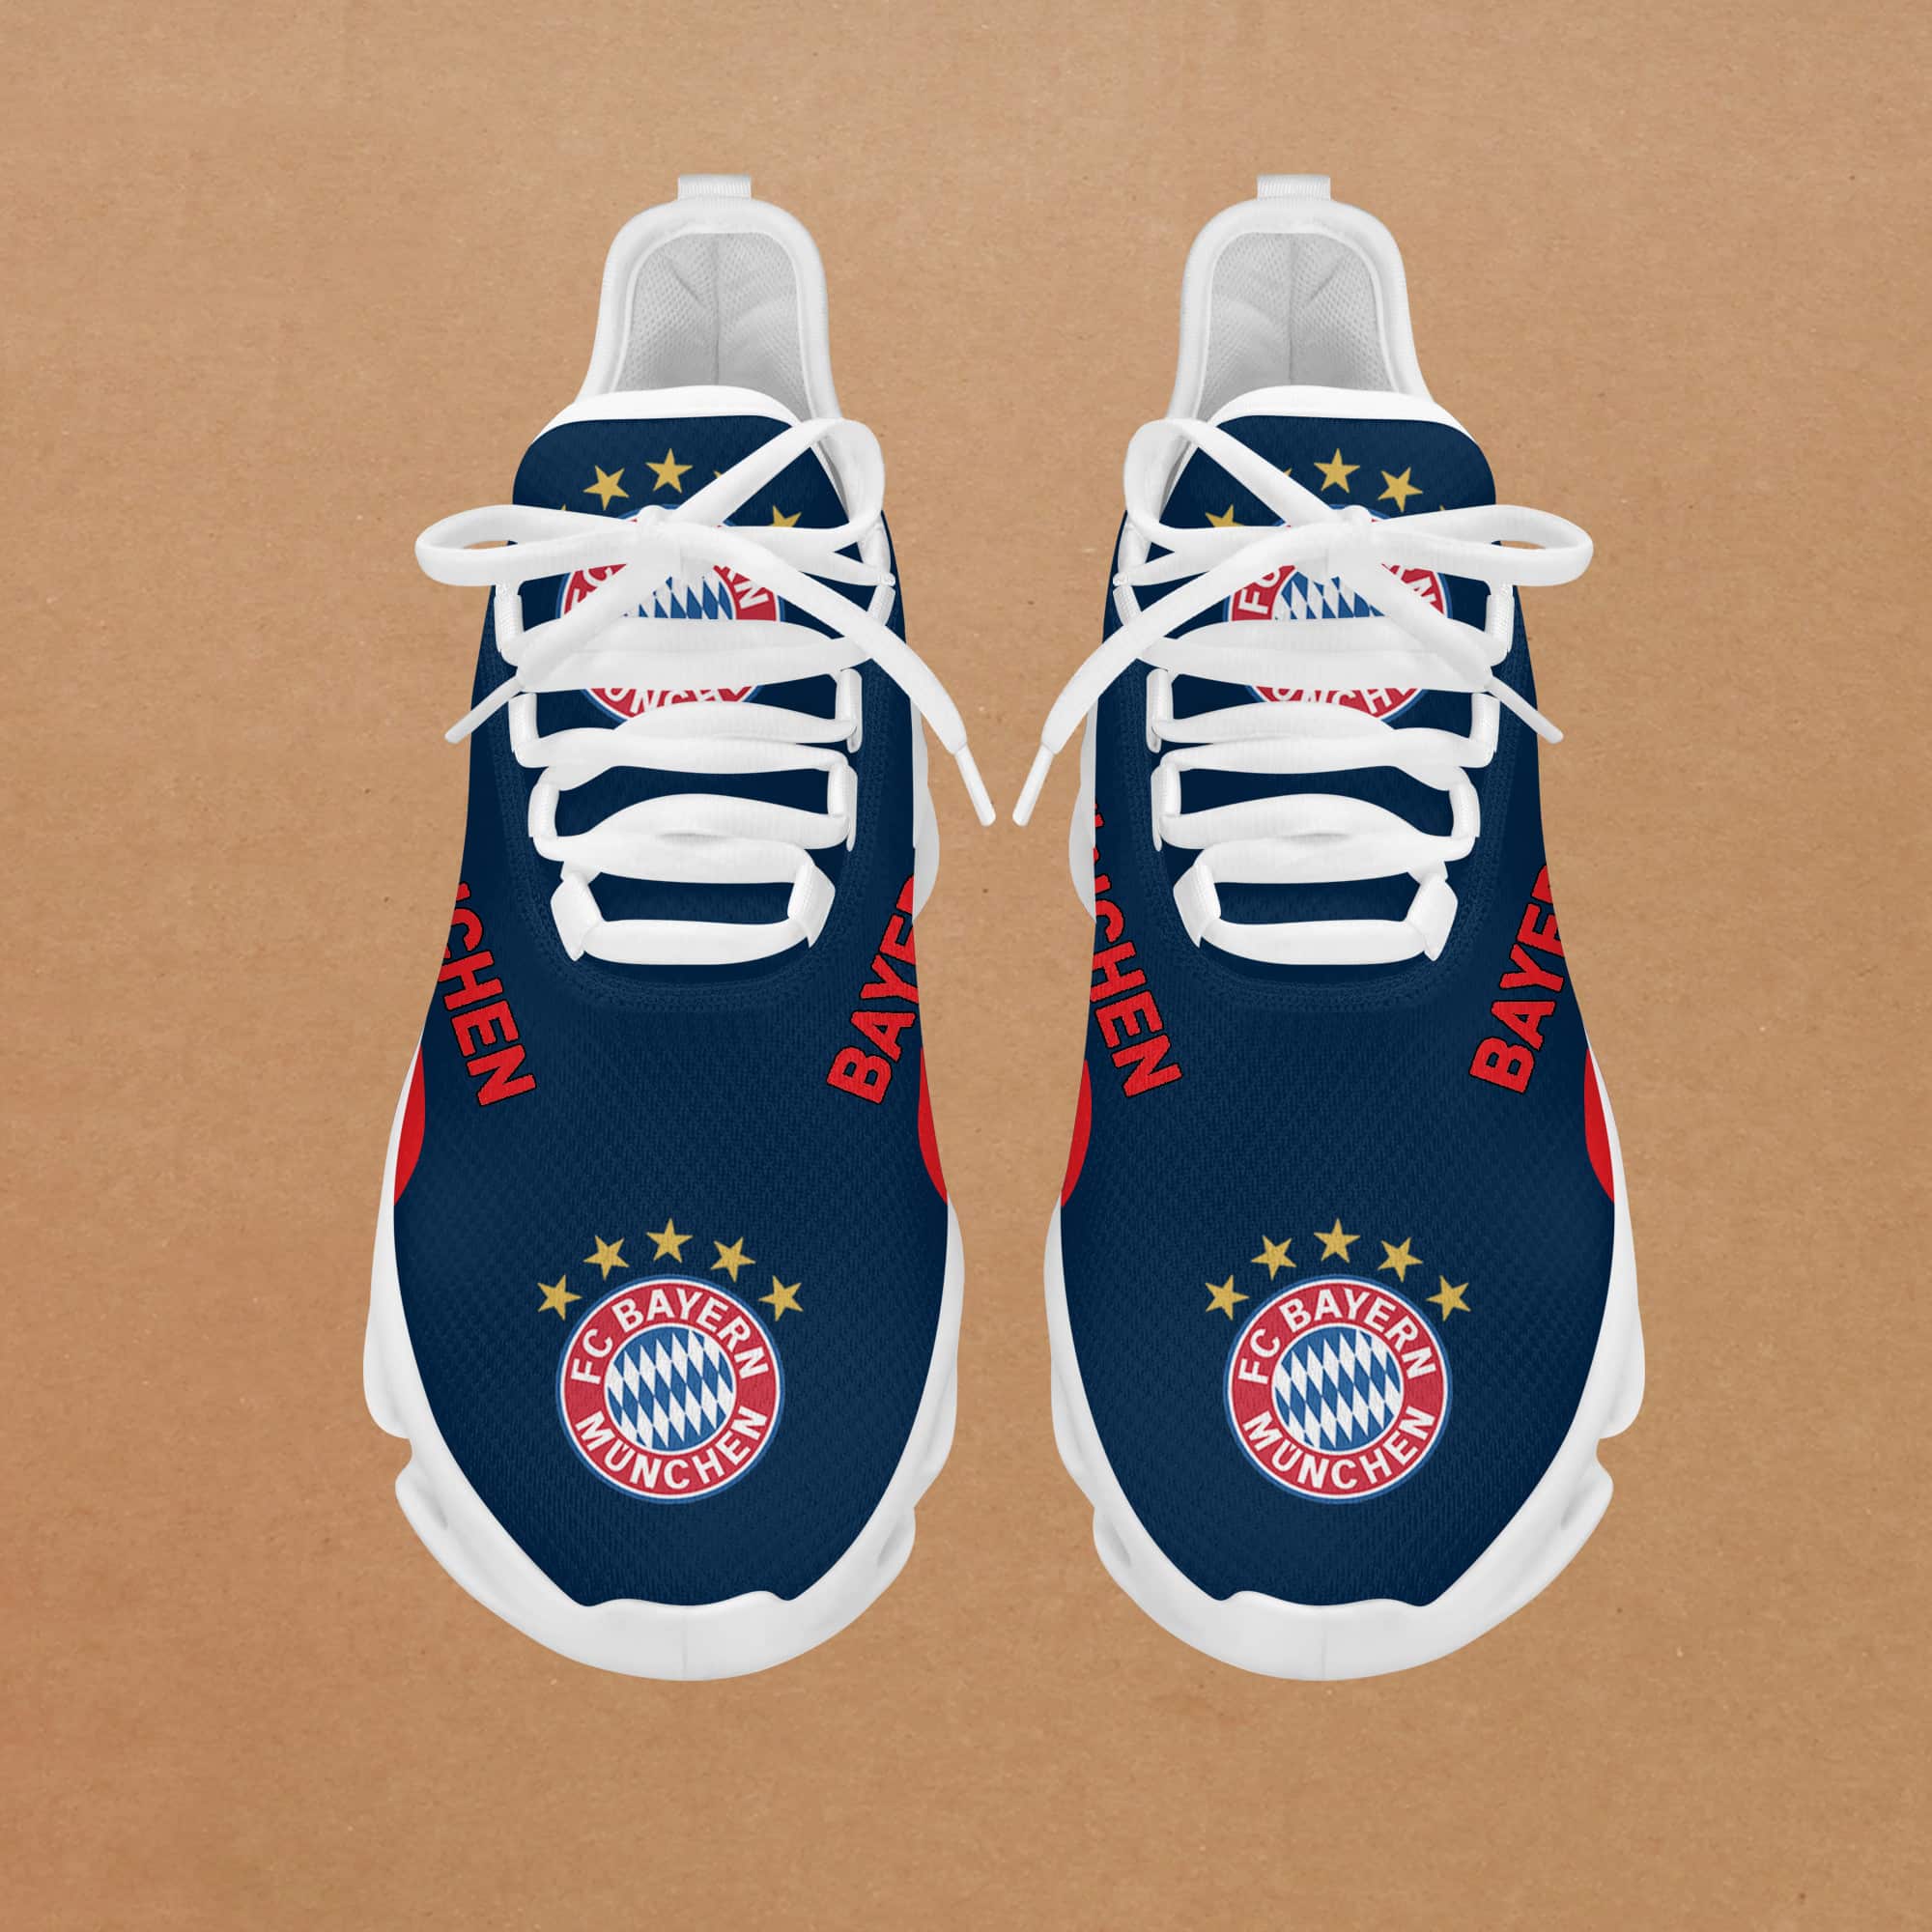 Fc Bayern Munich Running Shoes Max Soul Shoes Sneakers Ver 5 3